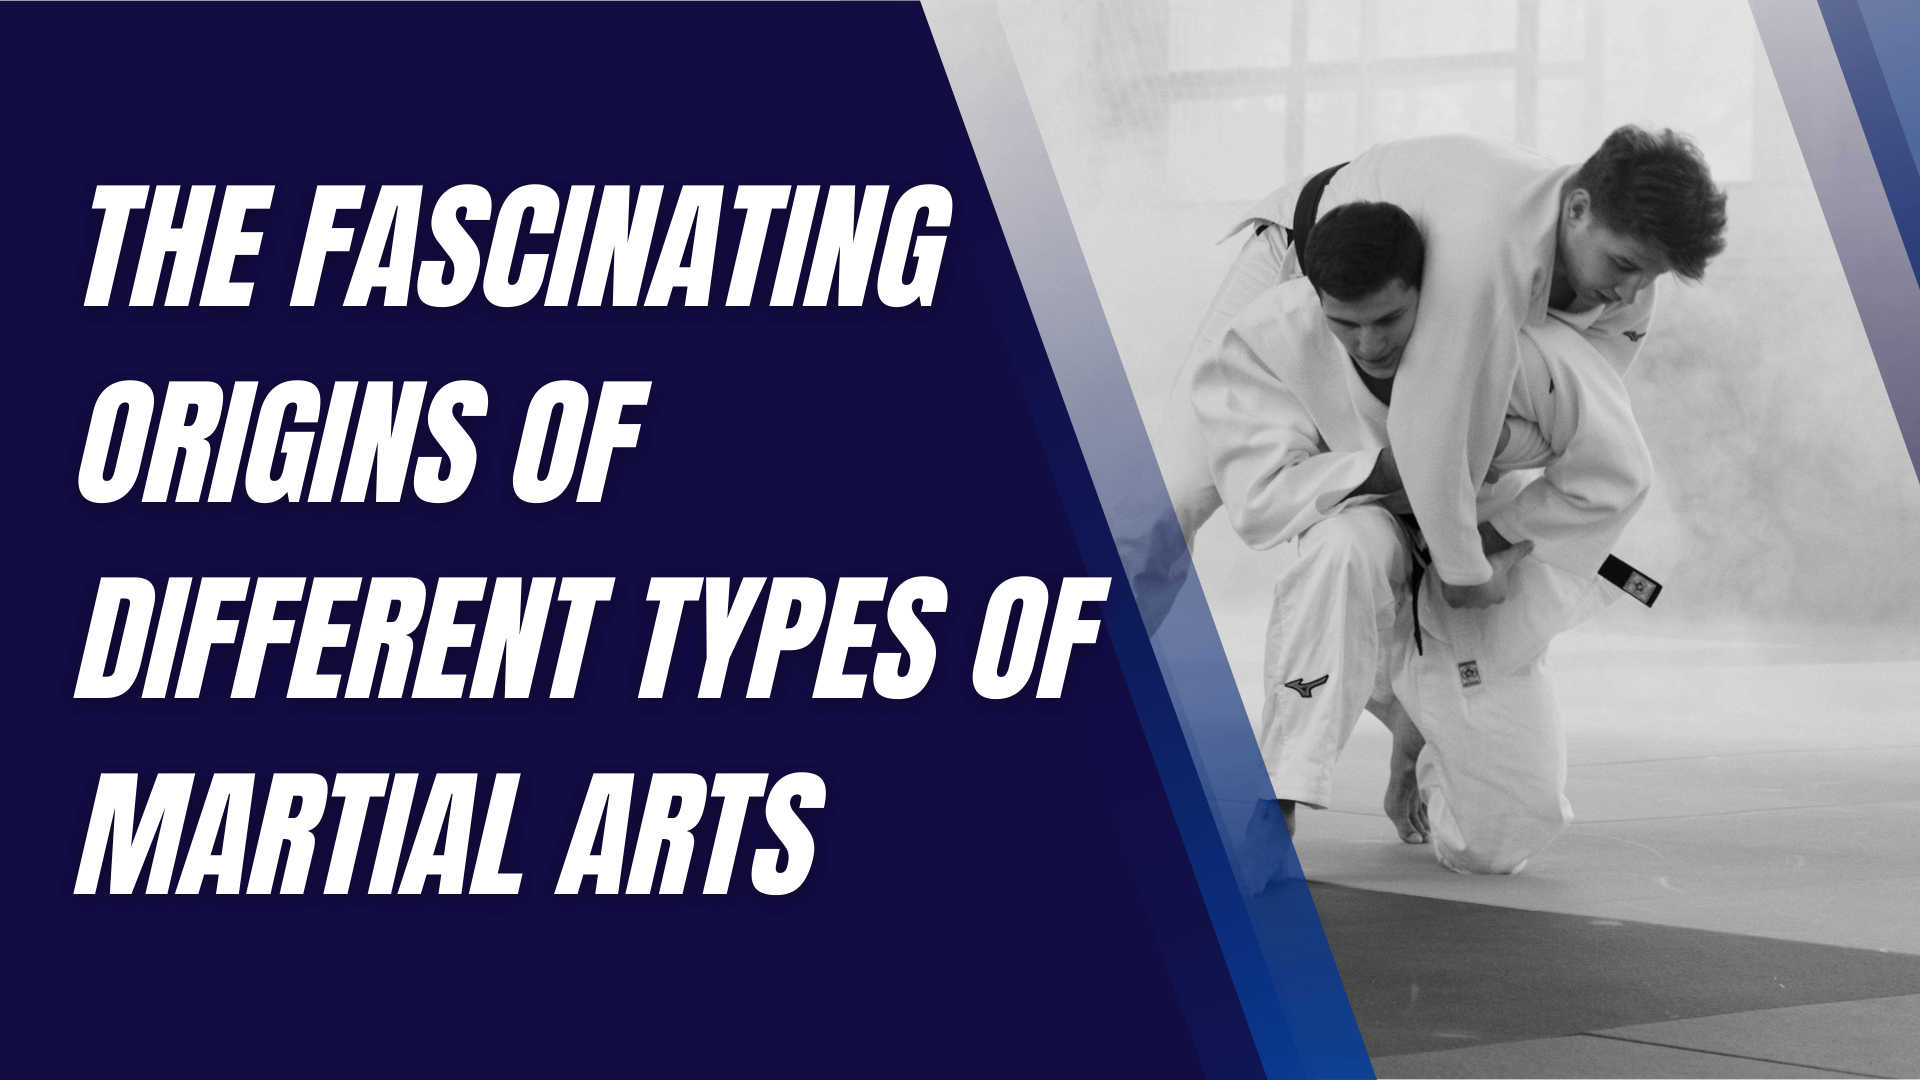 The Fascinating Origins of Different Types of Martial Arts